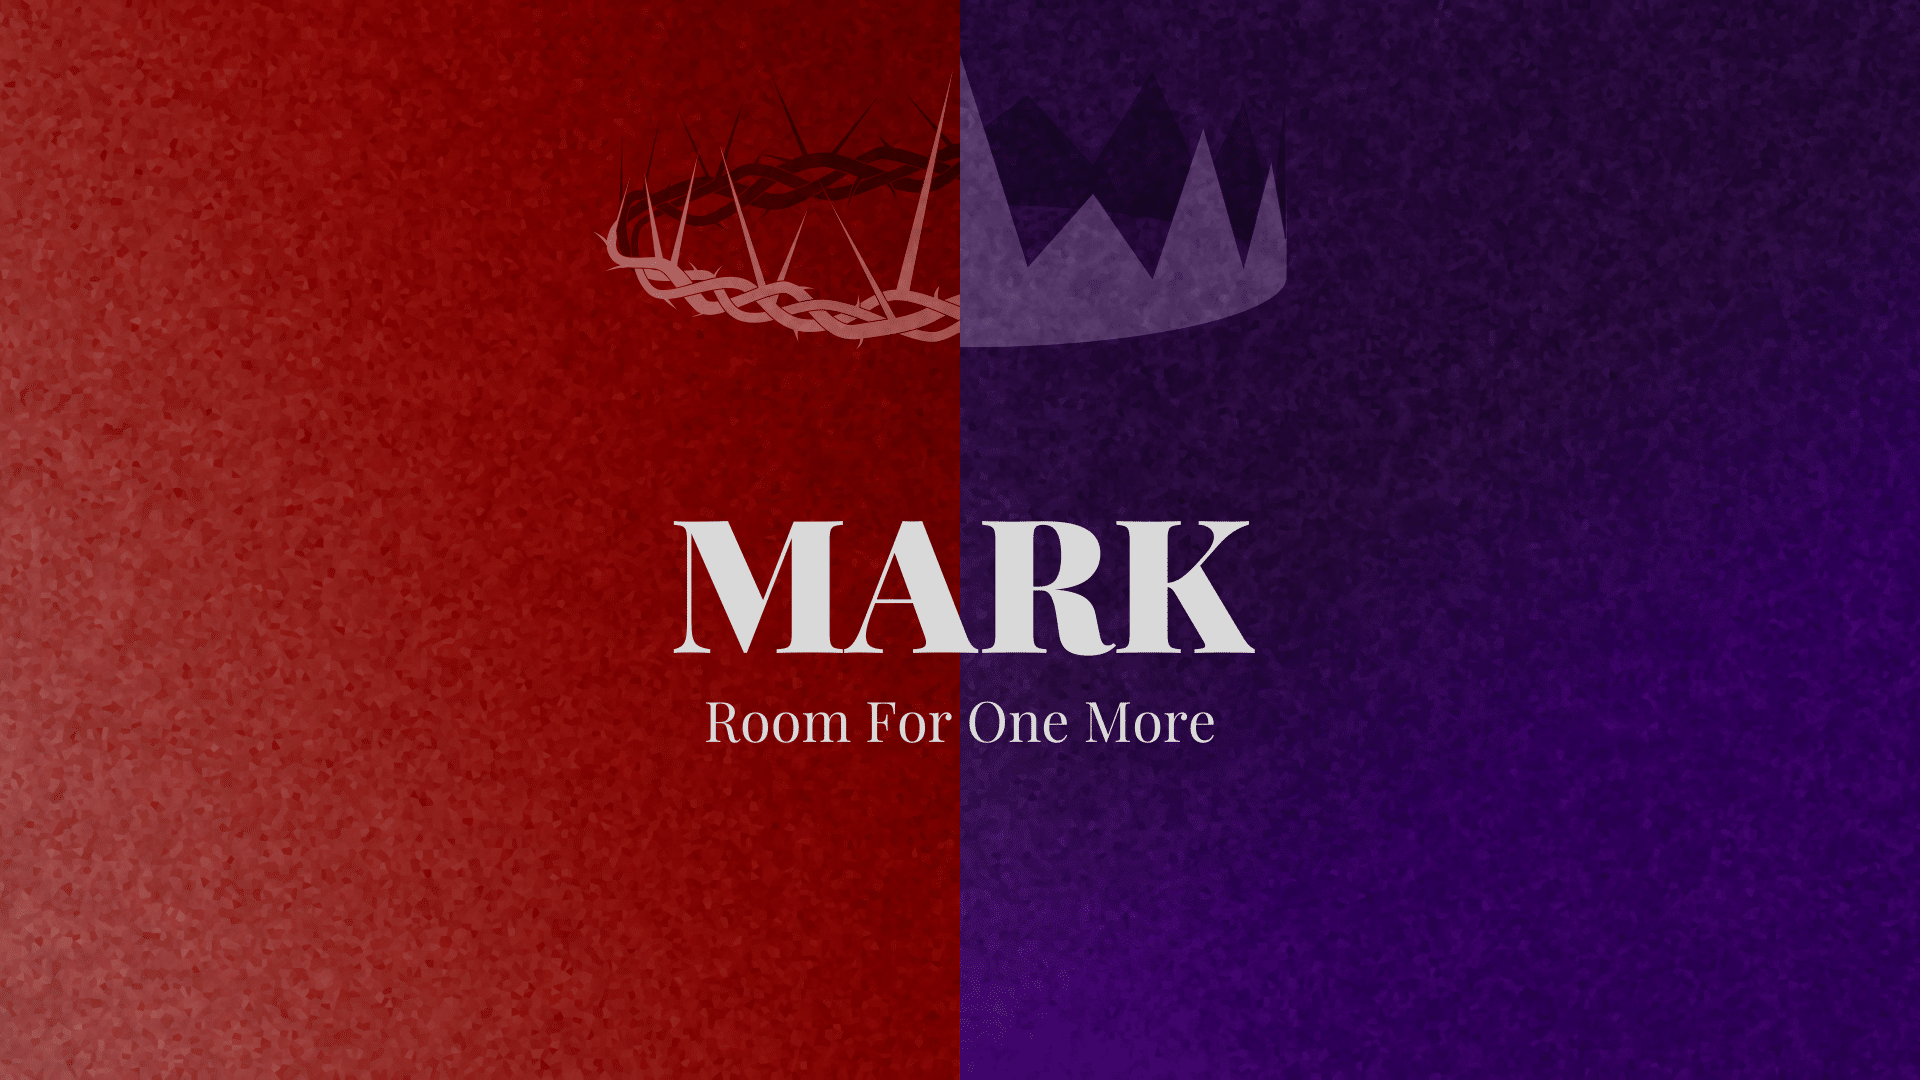 Mark: Room For One More